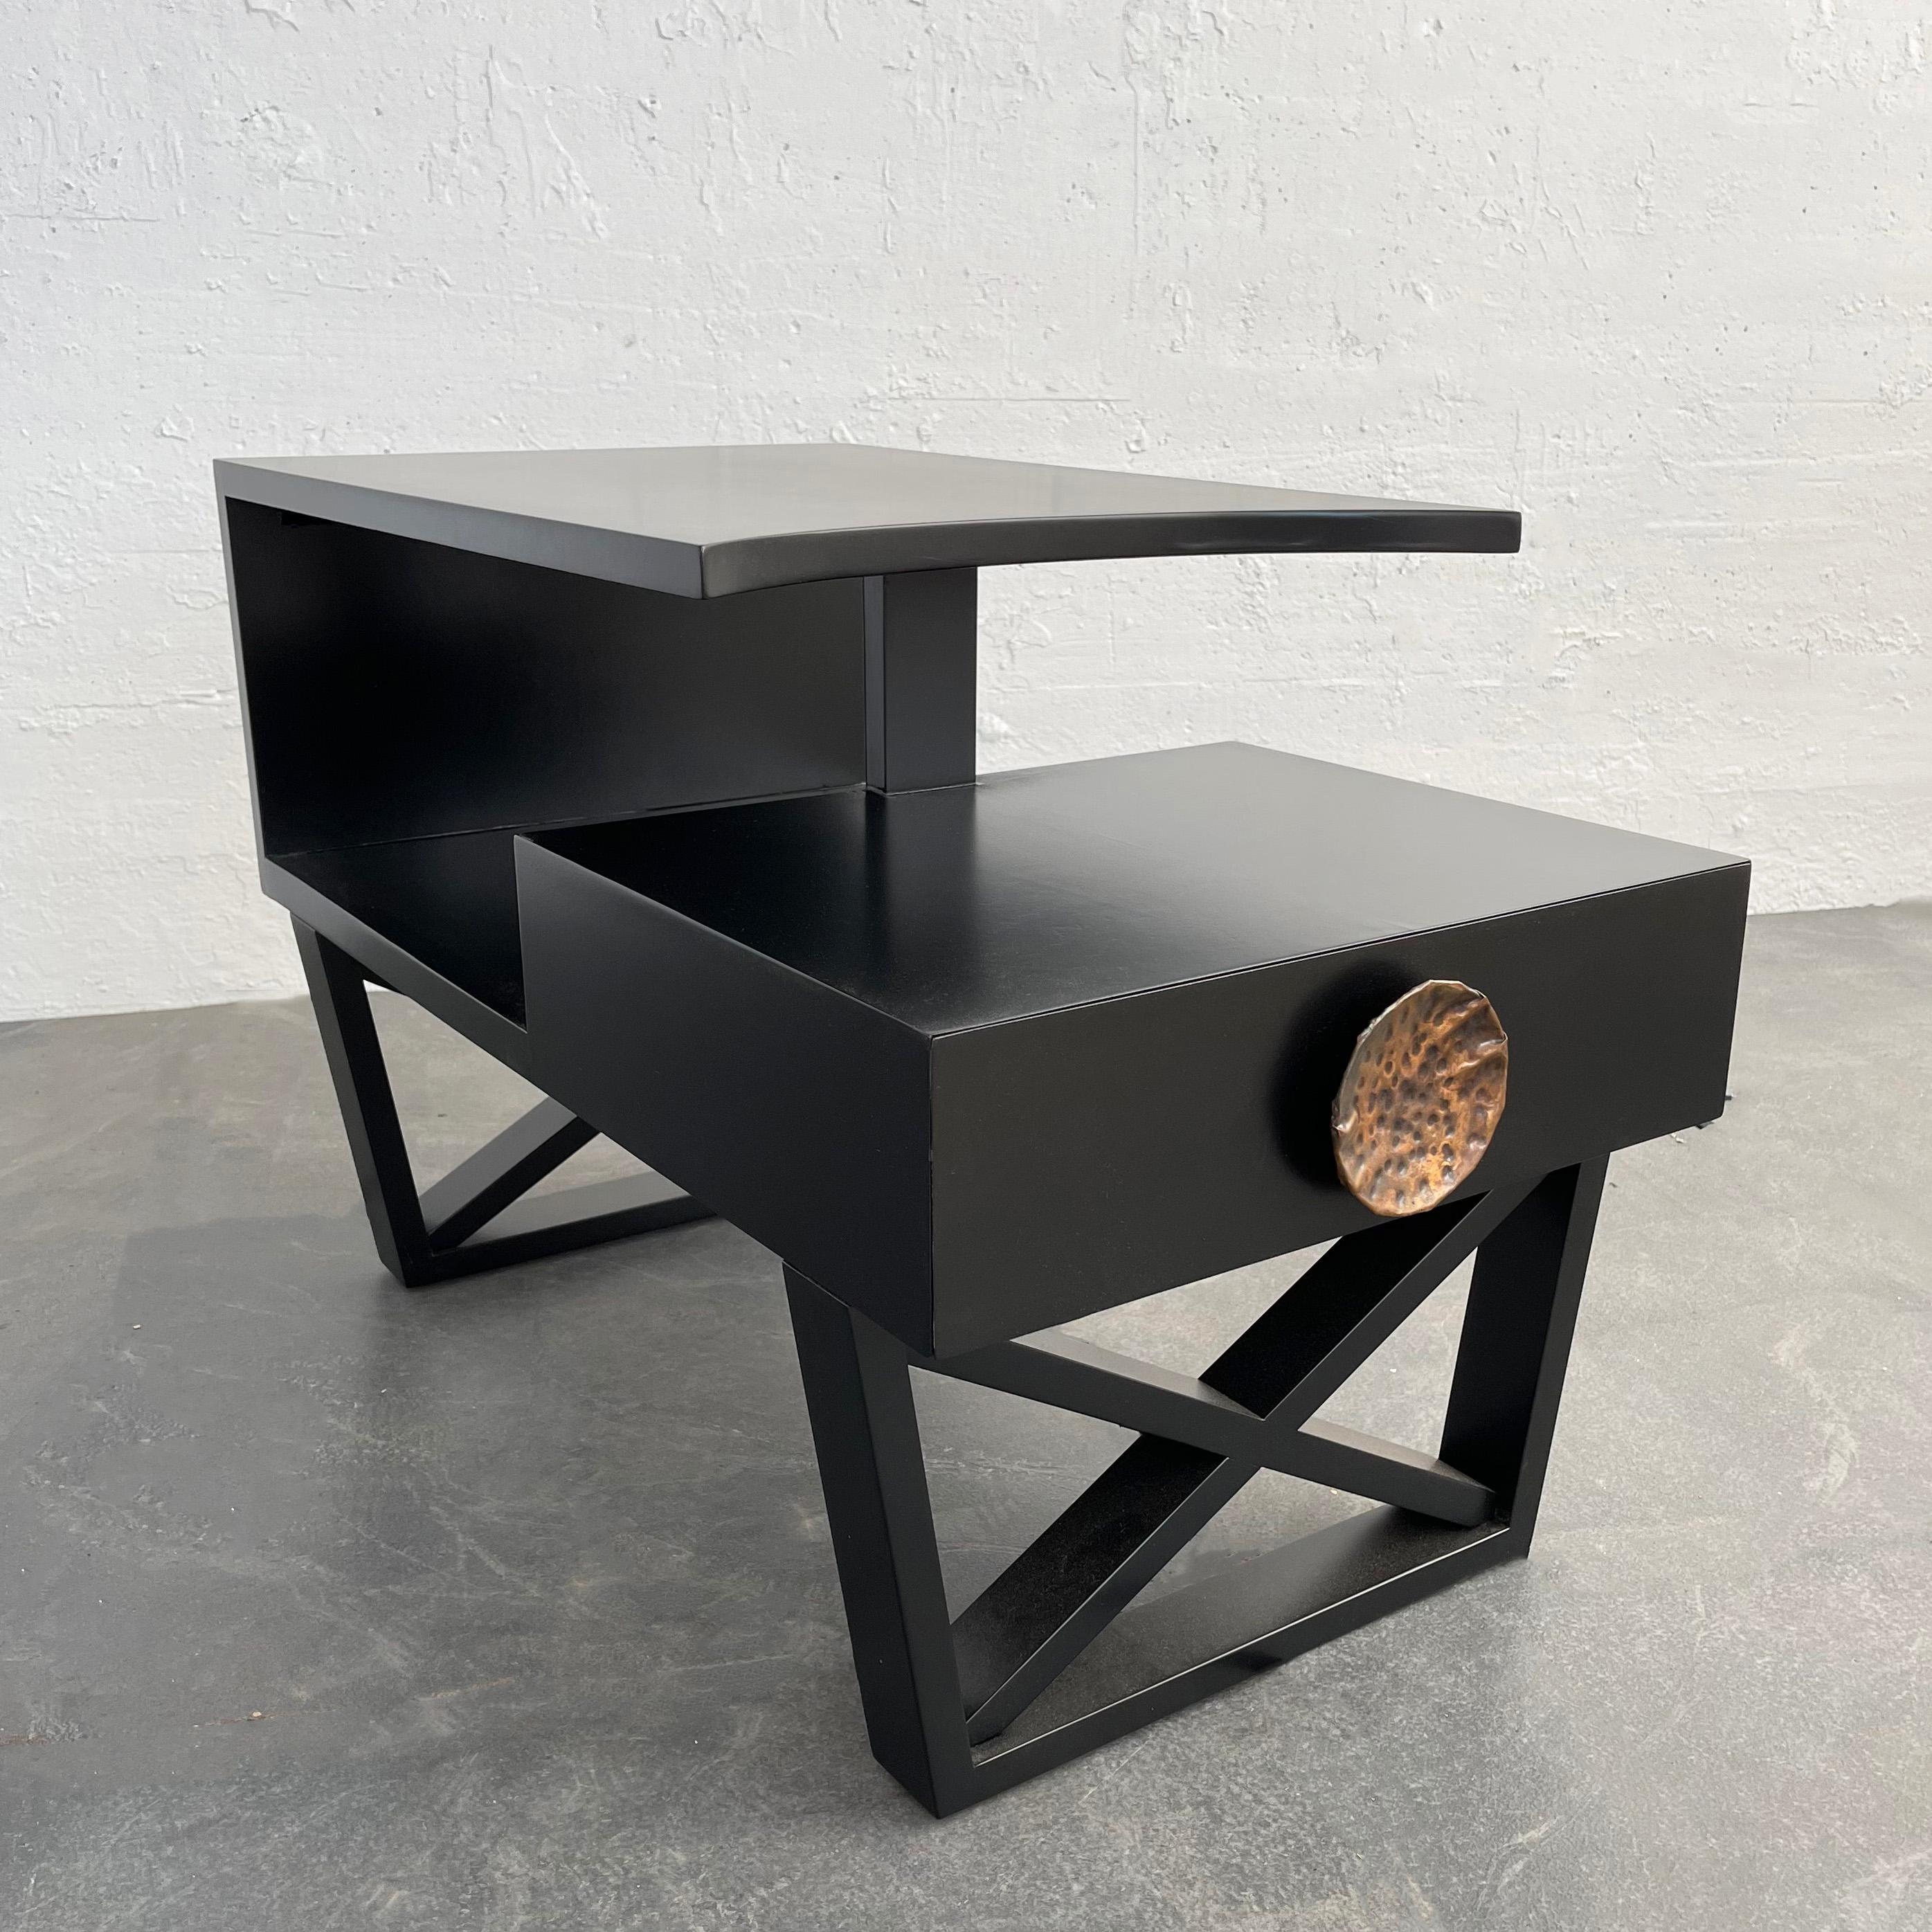 Glamourous, Hollywood regency, black lacquered mahogany, stepped side table attributed to James Mont features dramatic elements like a scooped edge top tier, framed X bases and oversized, brutalist, hammered copper pull on it's storage drawer. It's